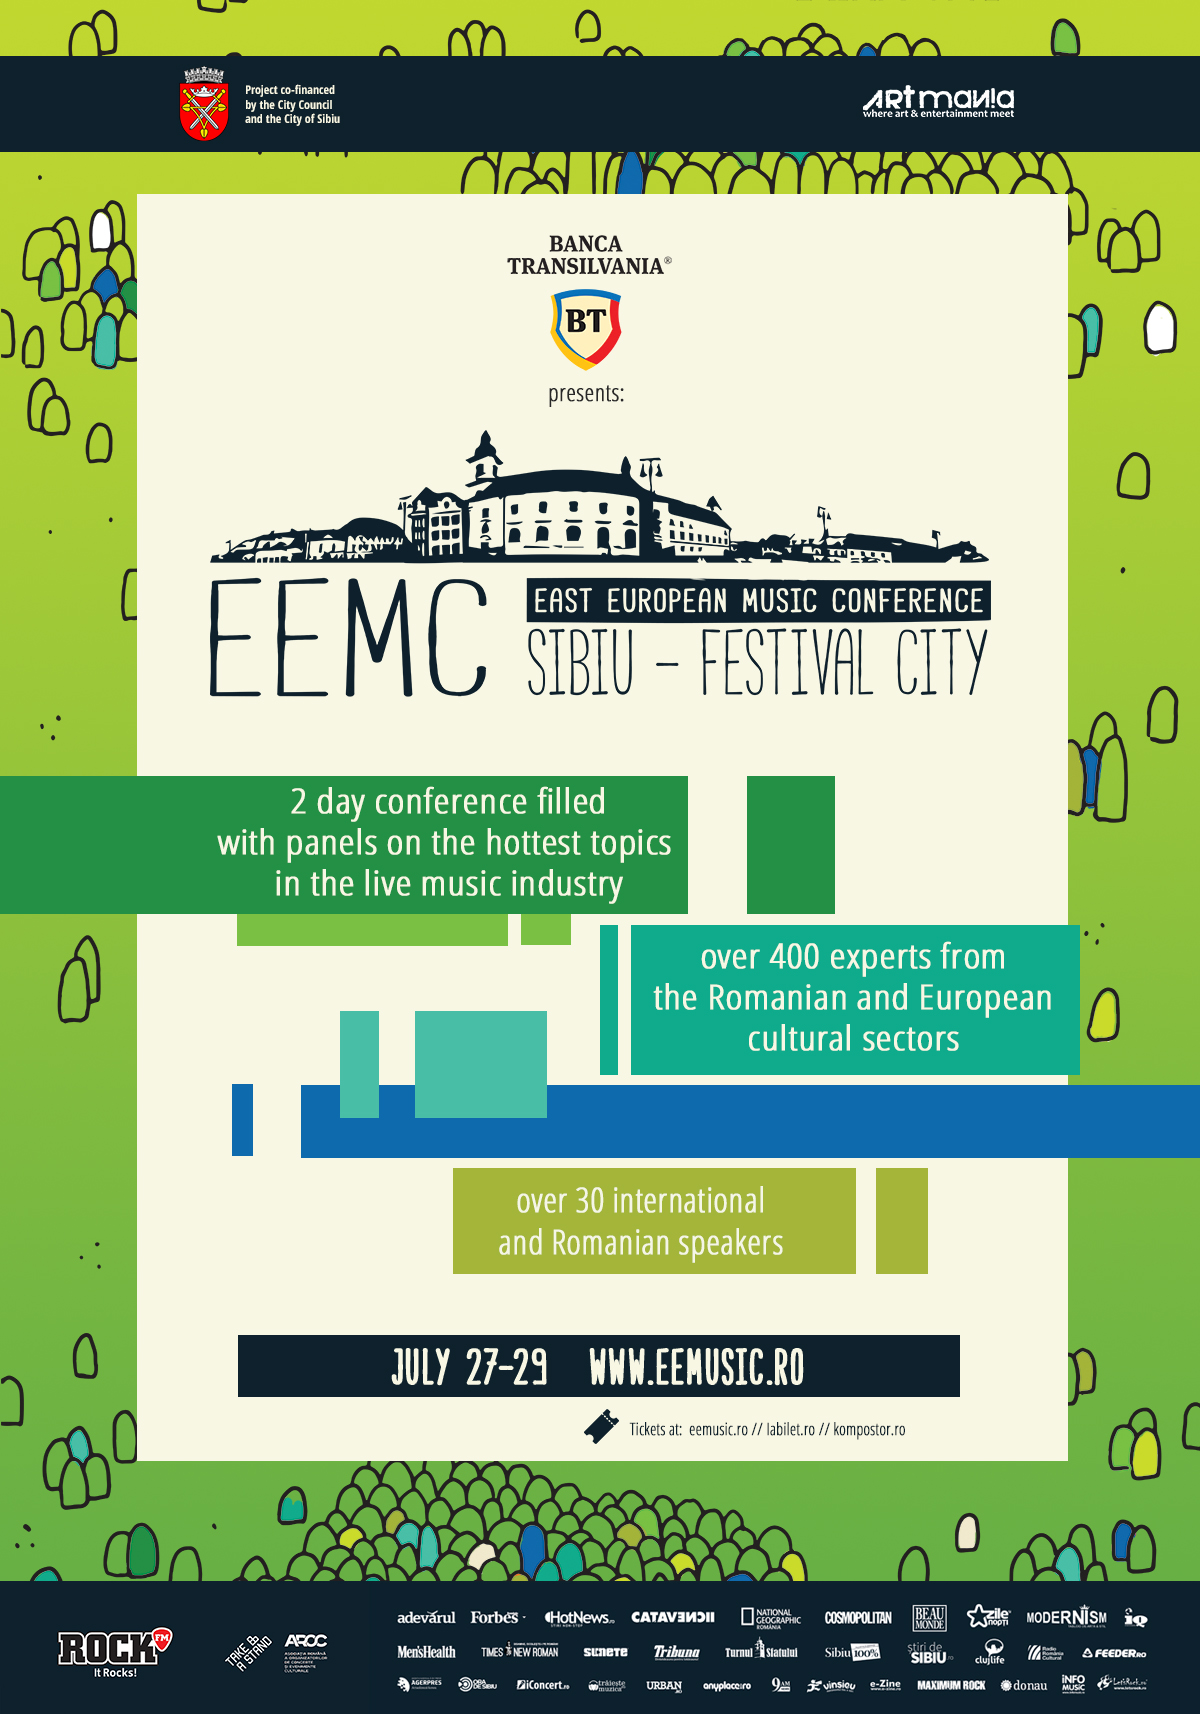 East European Music Conference’s first edition brings top European live music industry reps and top acts to Romania